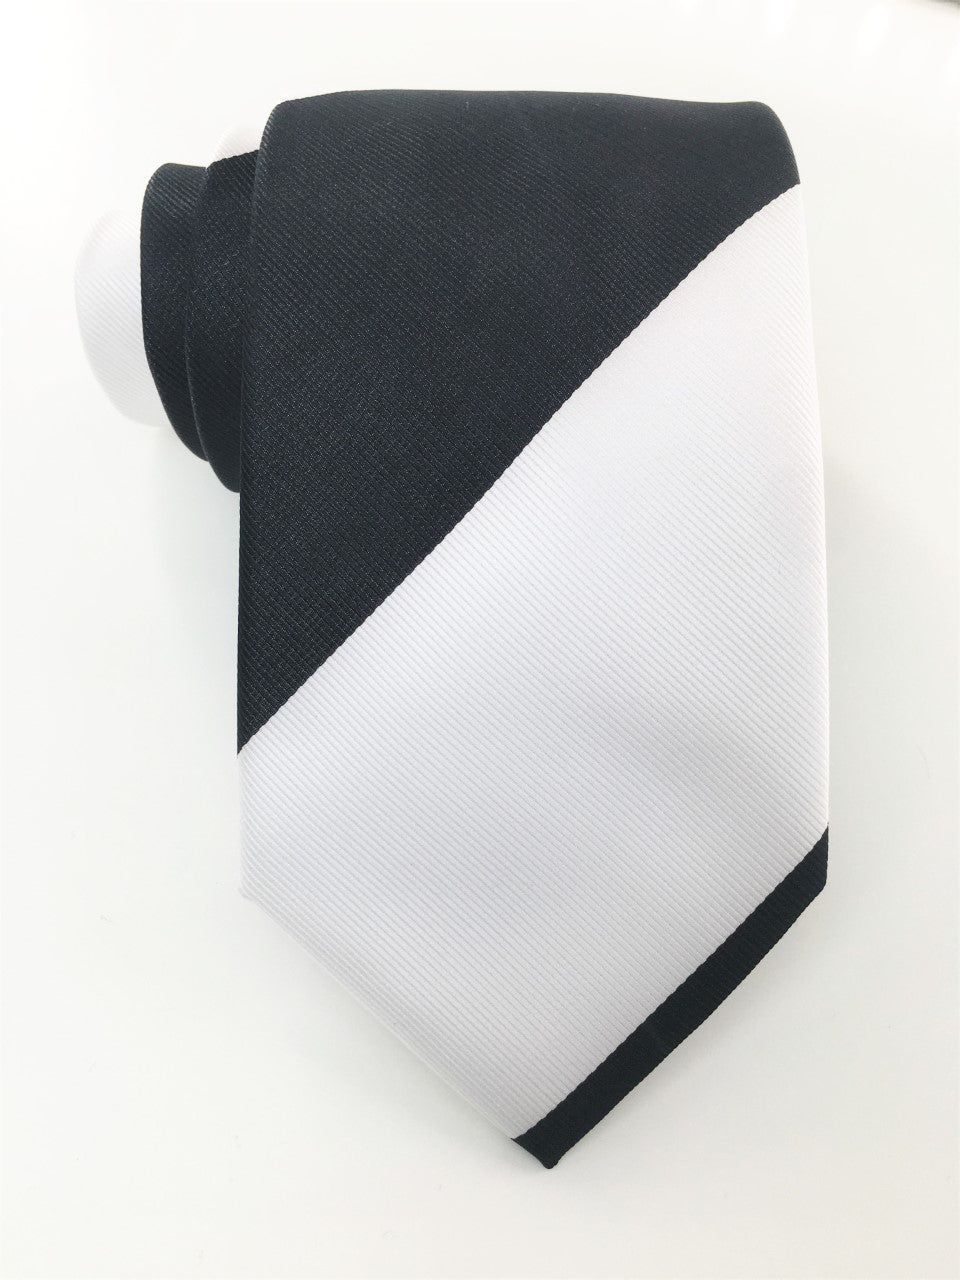 BW Black and white wide knot necktie set